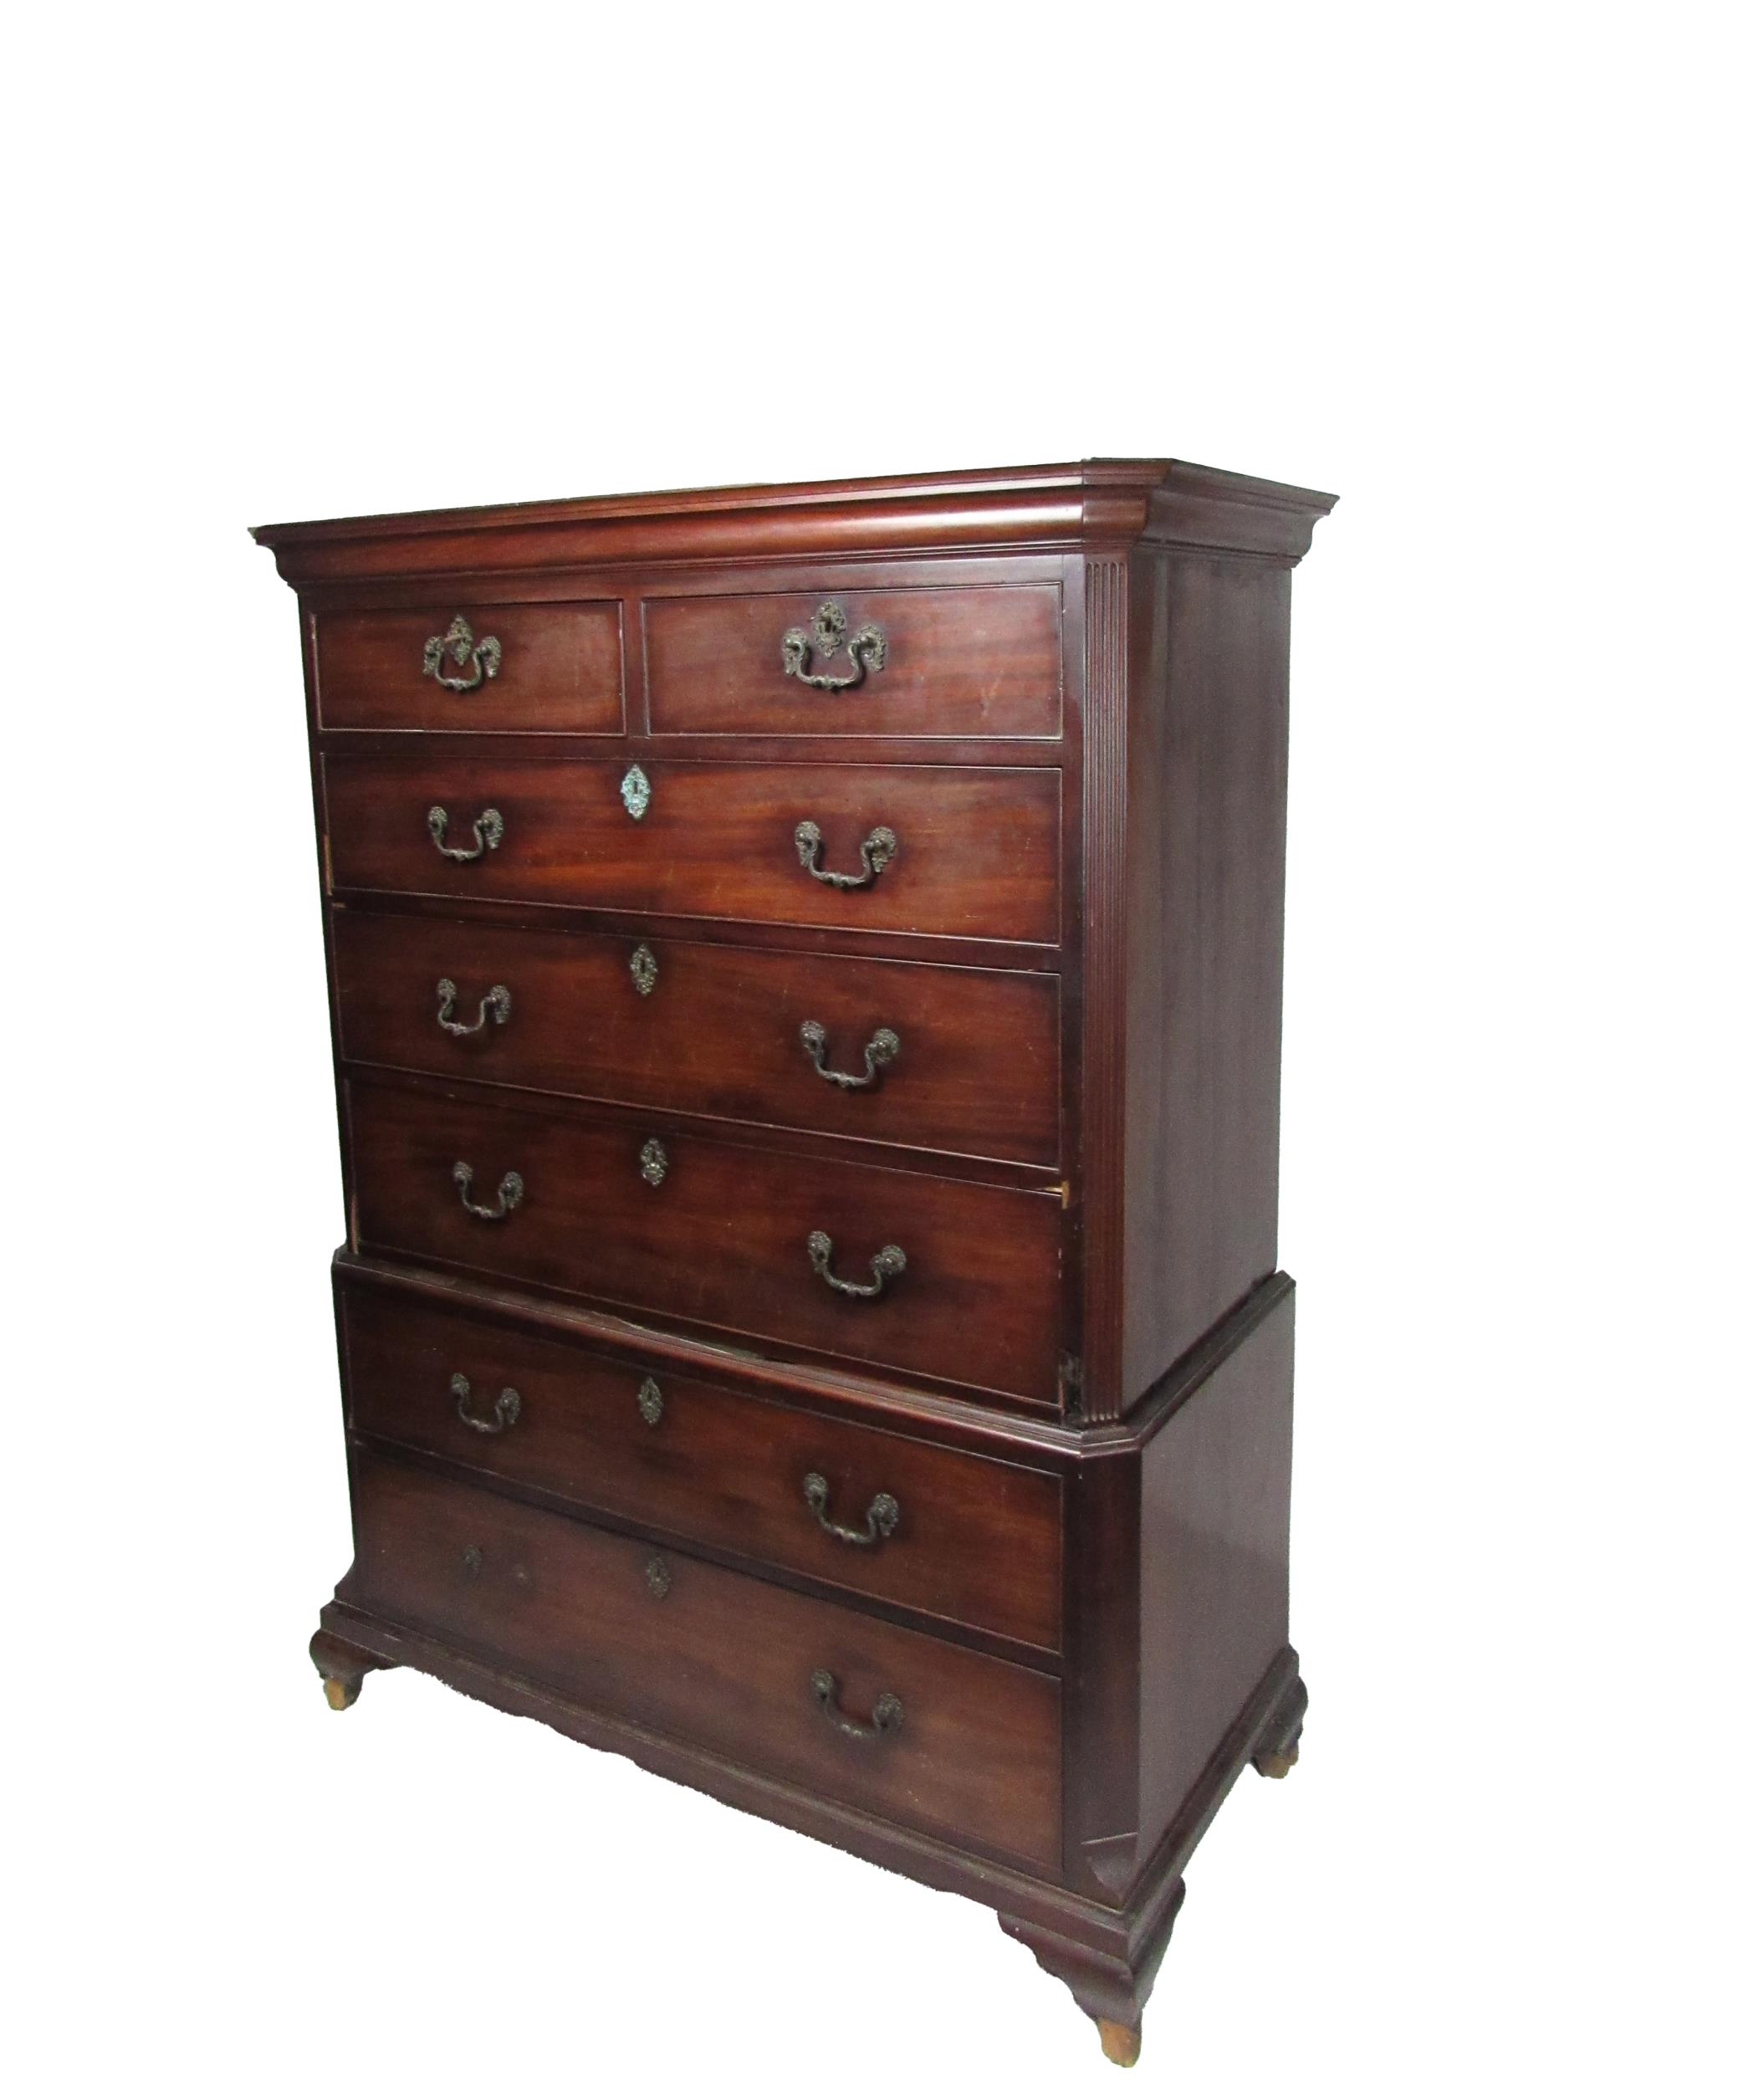 A fine quality Georgian period mahogany Chest on Chest of low proportions, the moulded cornice above